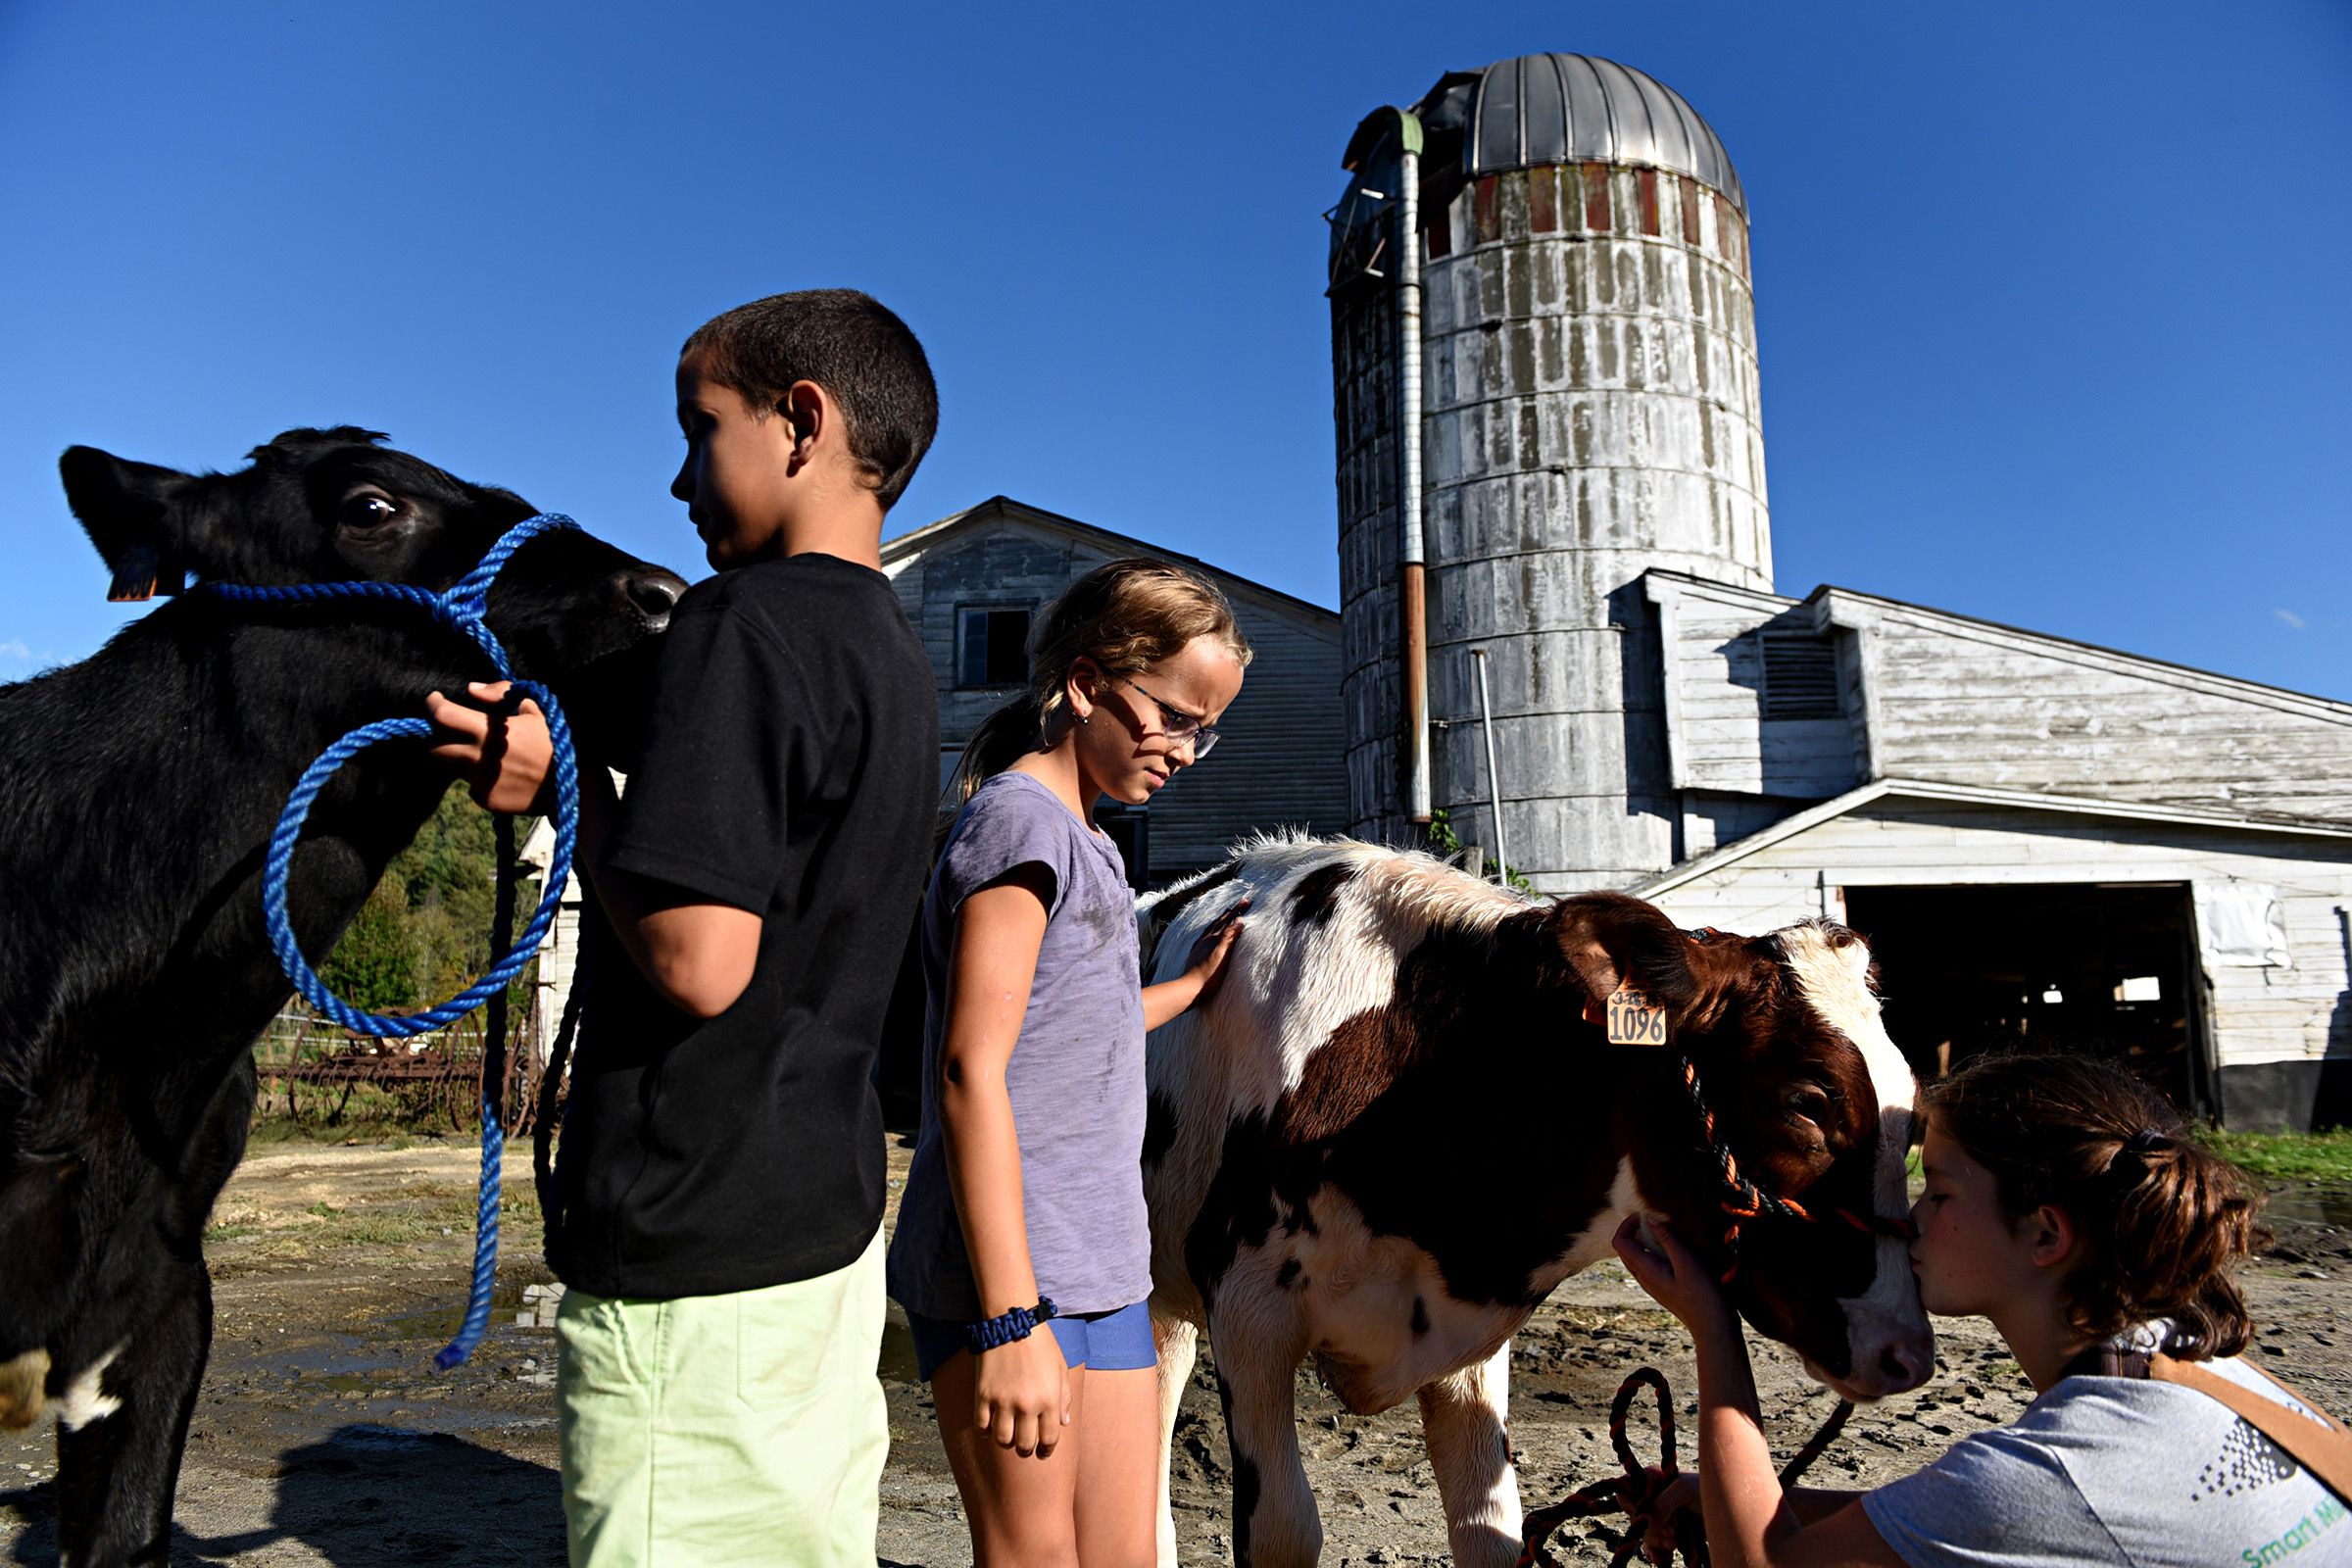 Tanner LaHaye, 10, holds his calf Peluca at Tullando Farm in Orford, N.H., on Friday, Sept. 27, 2019. Ella Tullar, 12, gives her calf Honor a kiss, Eila LaHaye walks between the calves, all live in Lyme, N.H. Tullando is owned by Tullar's family. The farm leases calves to 4-H members  so they can care for them and show them in local fairs.  (Valley News - Jennifer Hauck) Copyright Valley News. May not be reprinted or used online without permission. Send requests to permission@vnews.com.